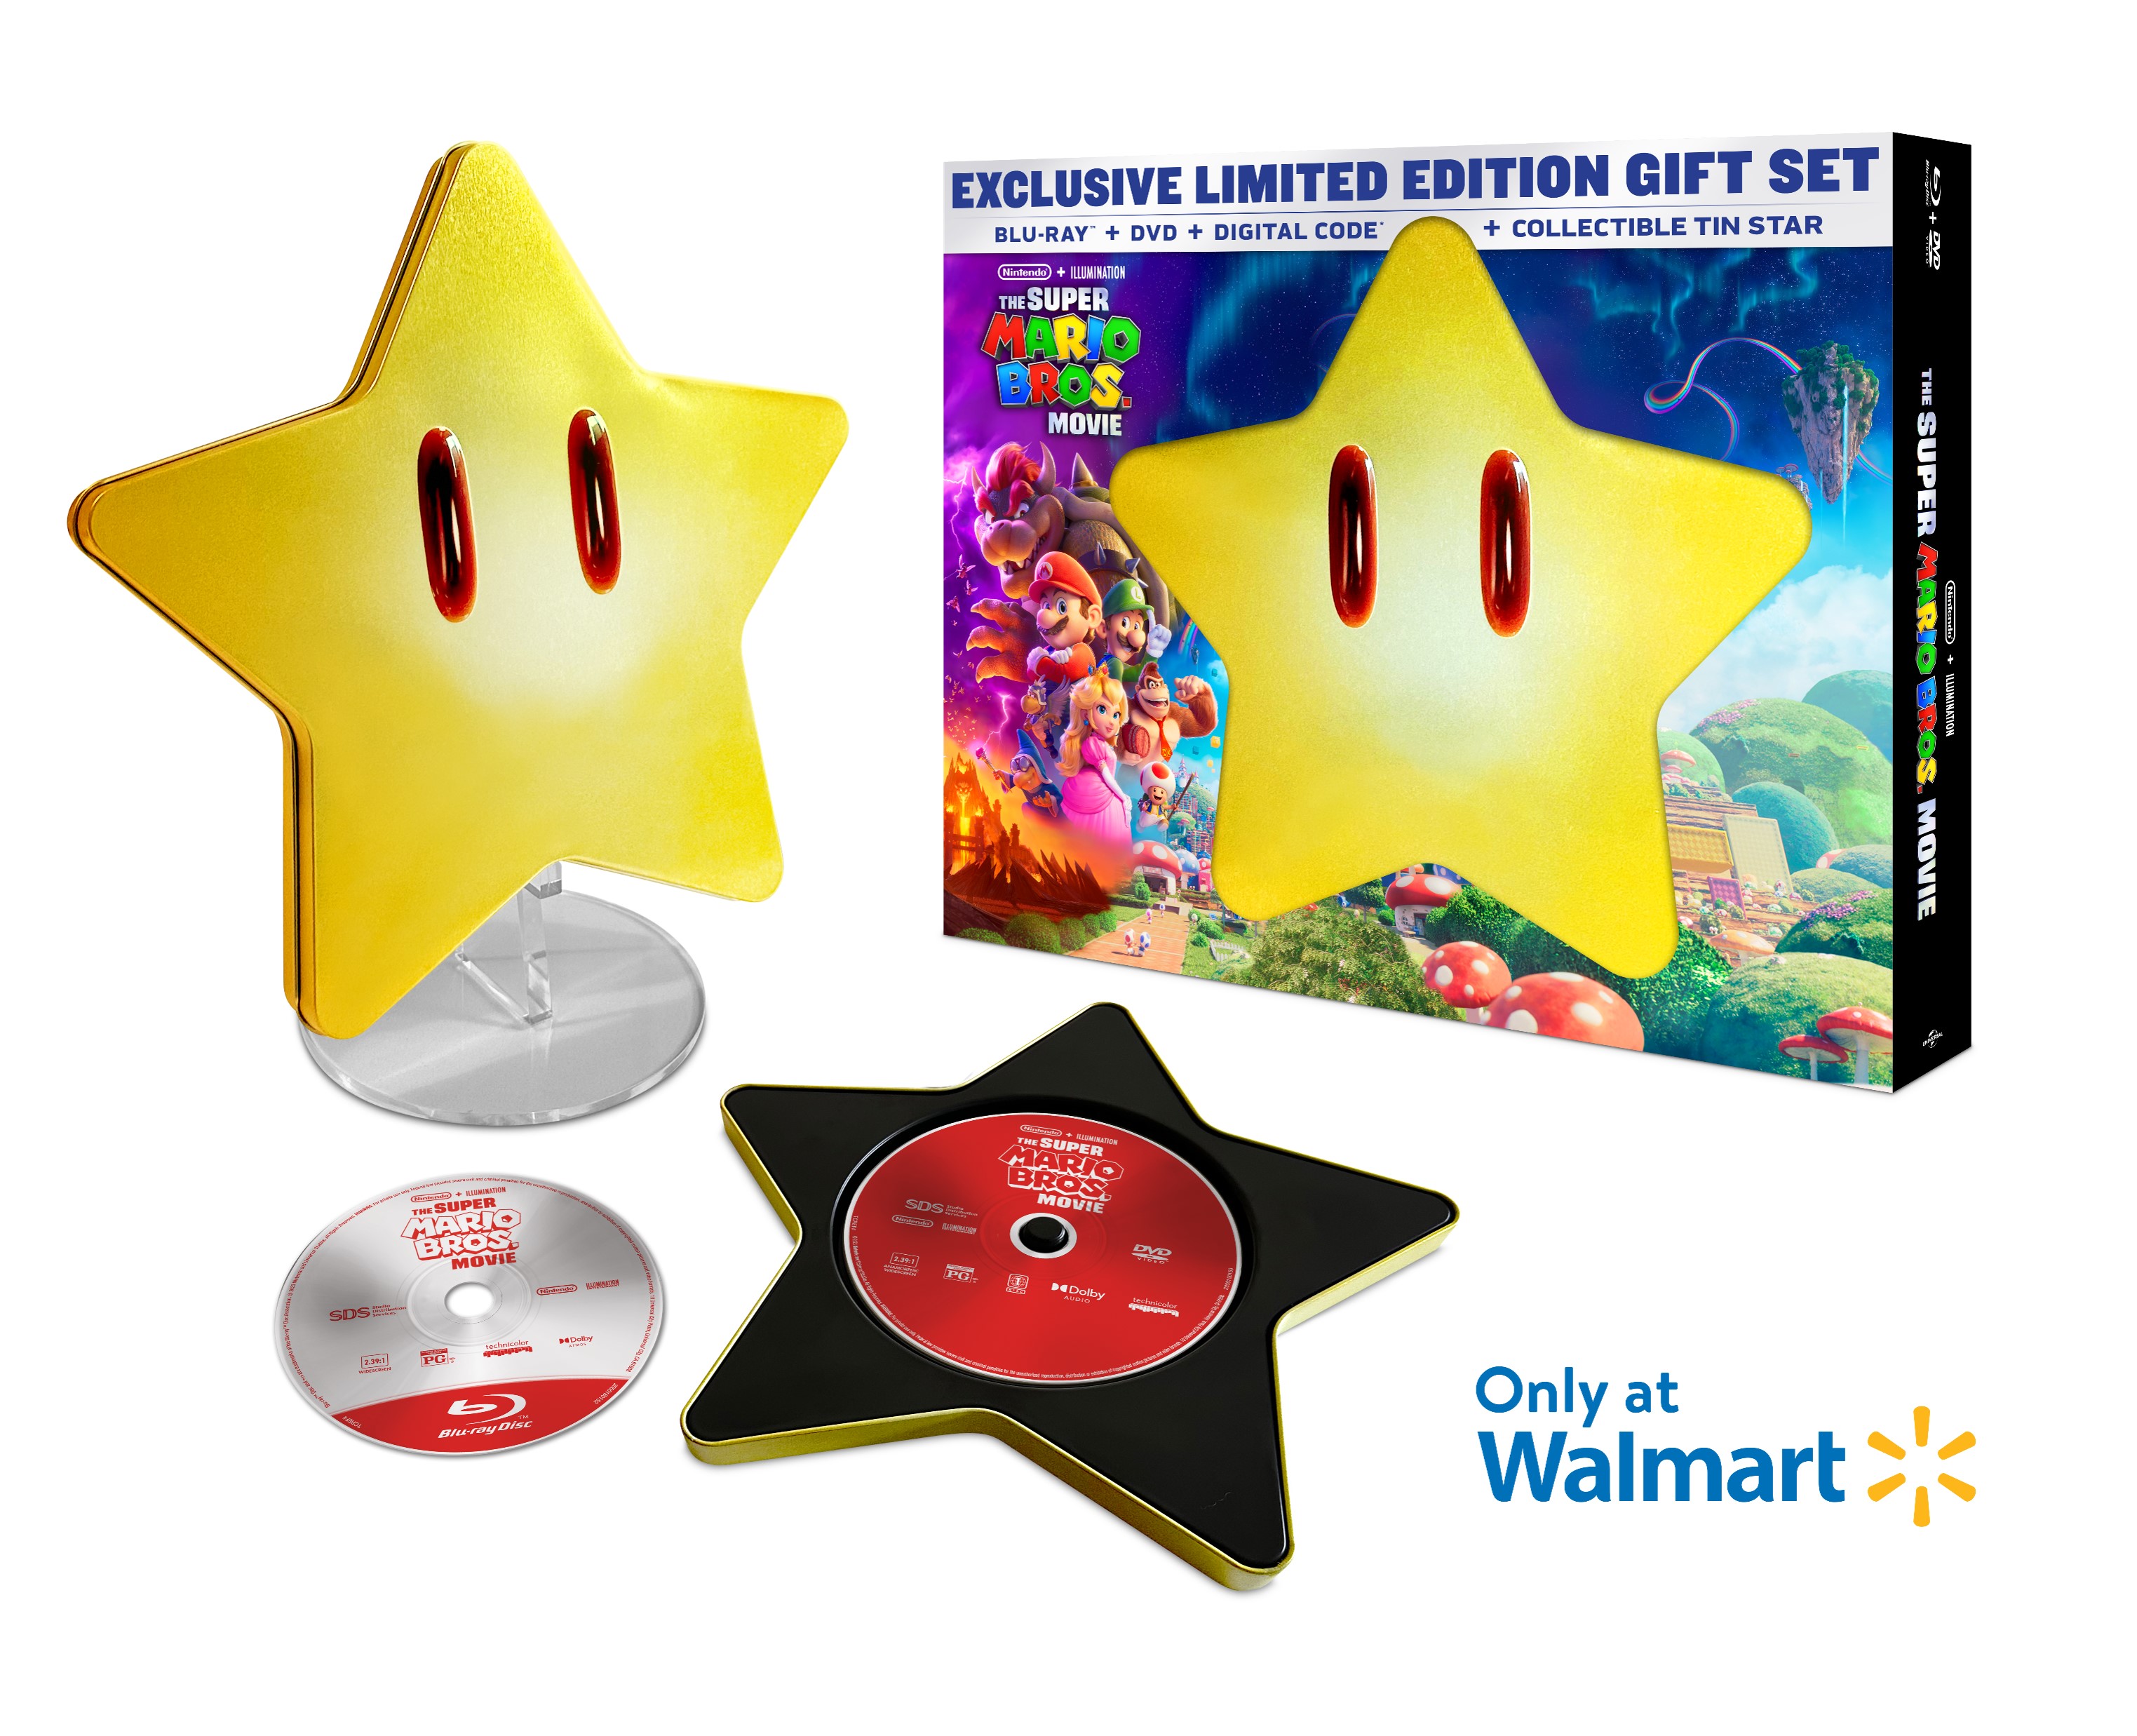 The Super Mario Bros. Movie Limited Edition Giftset with Collectible Tin Star (Walmart Exclusive) (Blu-ray + DVD + Digital Copy) - image 1 of 12